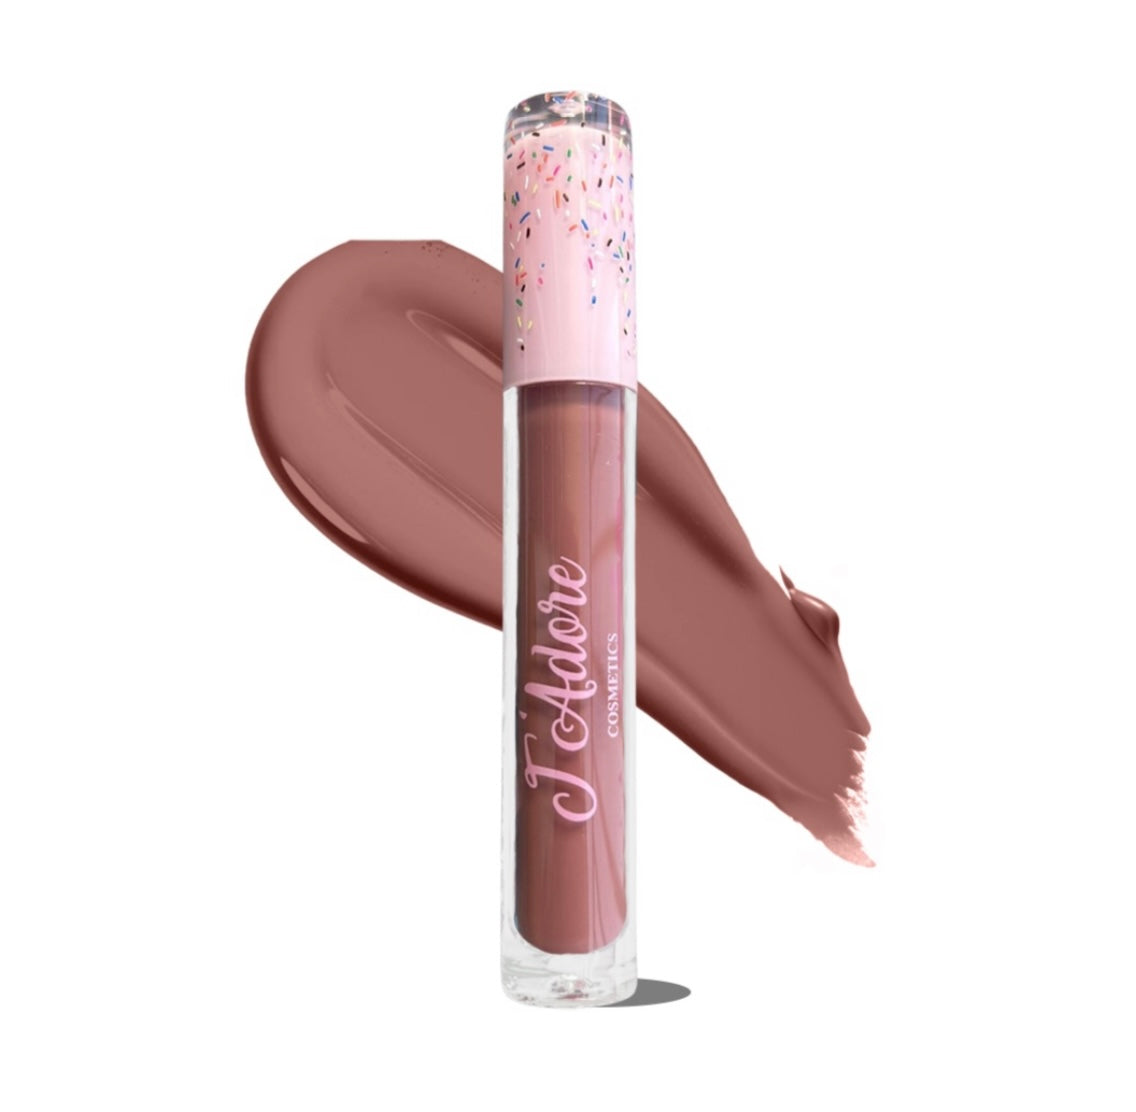 'Frosted' Liquid Matte Lipstick |Sweet Lips Collection|